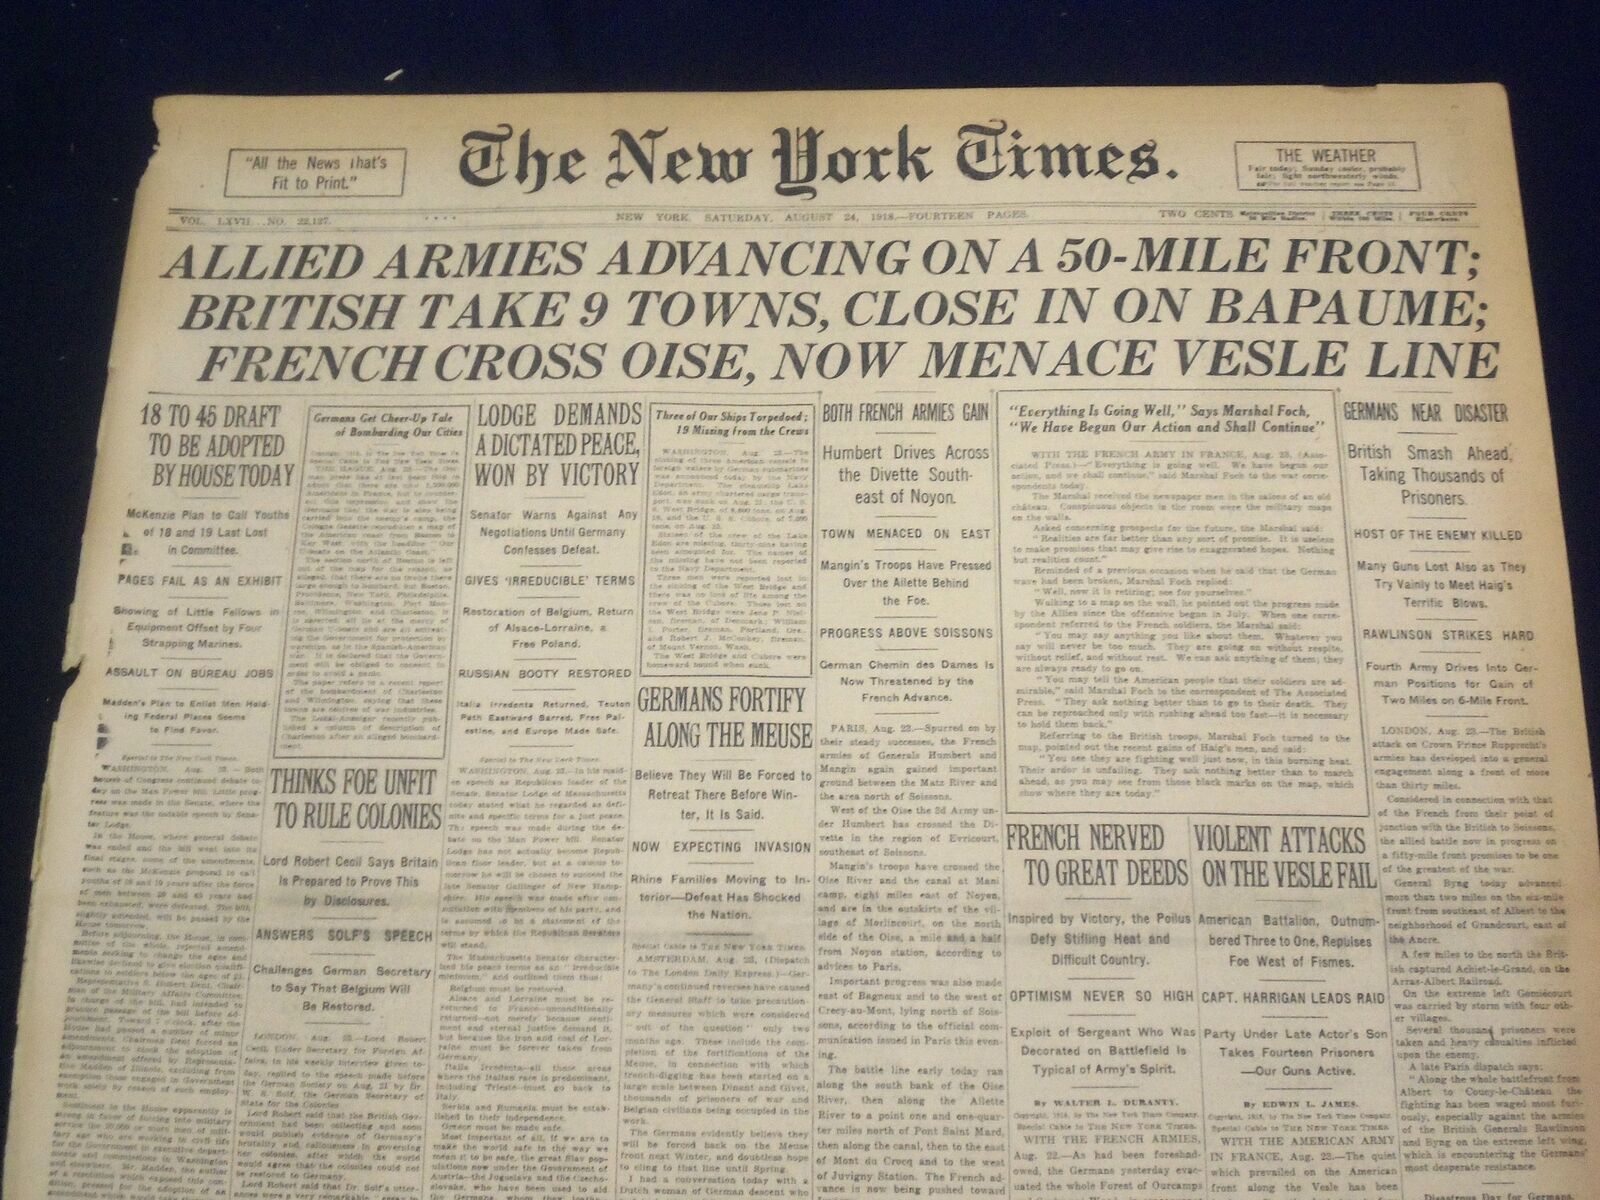 1918 AUGUST 24 NEW YORK TIMES - ALLIED ARMIES ADVANCING - NT 9202